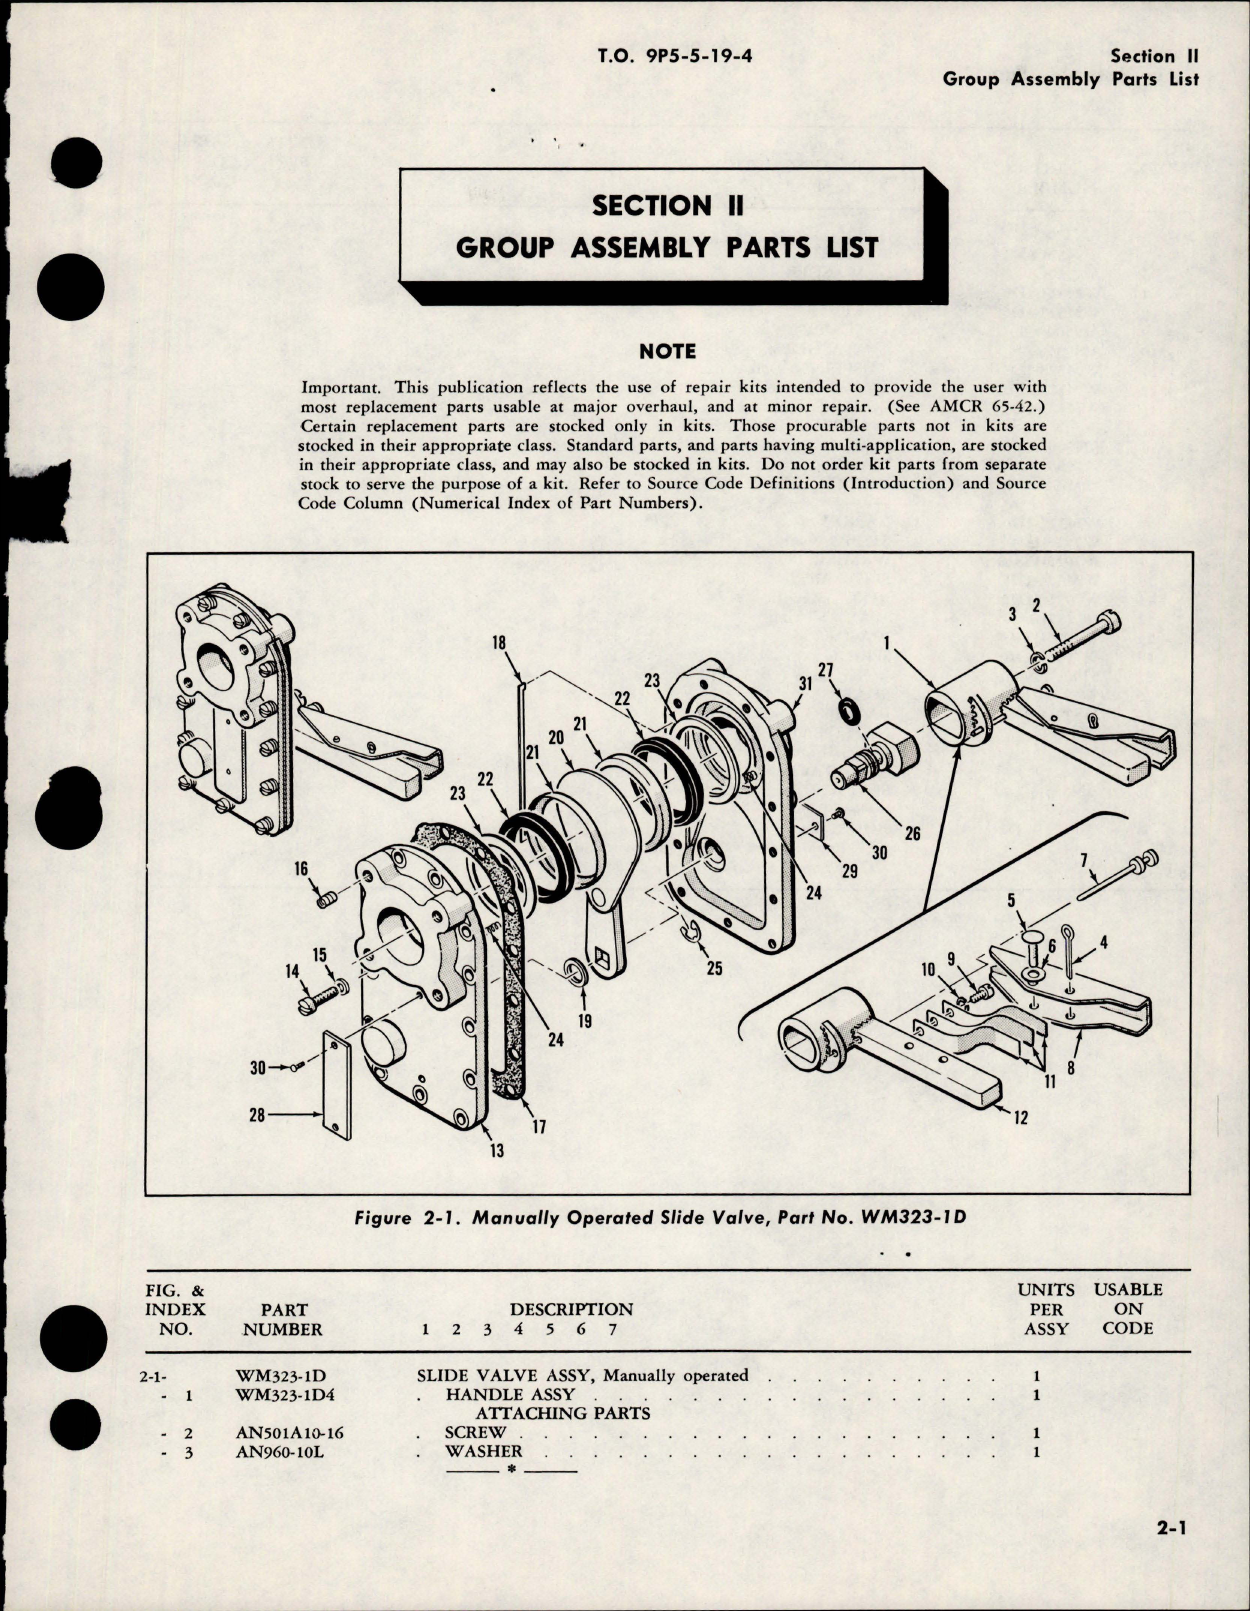 Sample page 7 from AirCorps Library document: Illustrated Parts Breakdown for Manually Operated Slide Valve Assemblies 